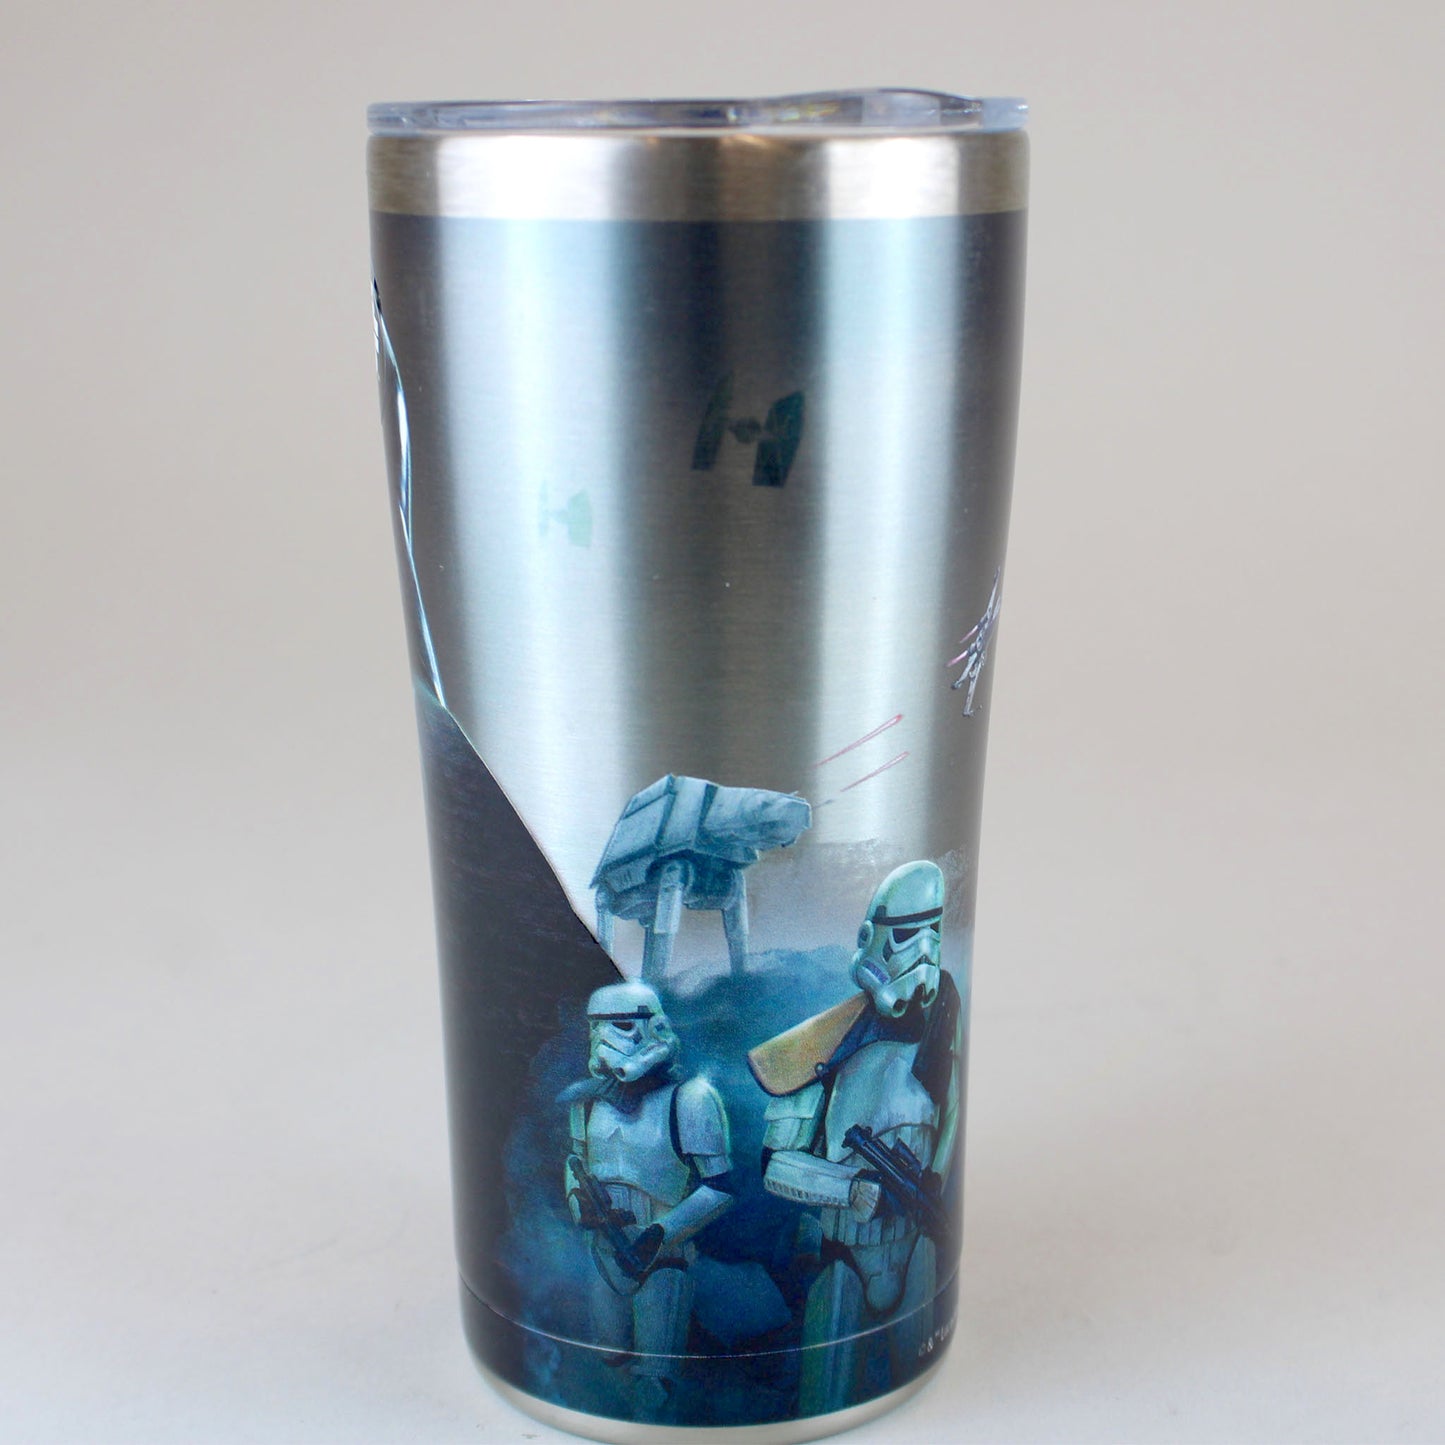 https://cdn.shopify.com/s/files/1/0409/4971/1001/products/darth-vader-star-wars-tervis-20oz-stainless-steel-tumbler1_962a15d5-51d5-4750-b2dd-7a52a8612627_1445x.jpg?v=1671466722